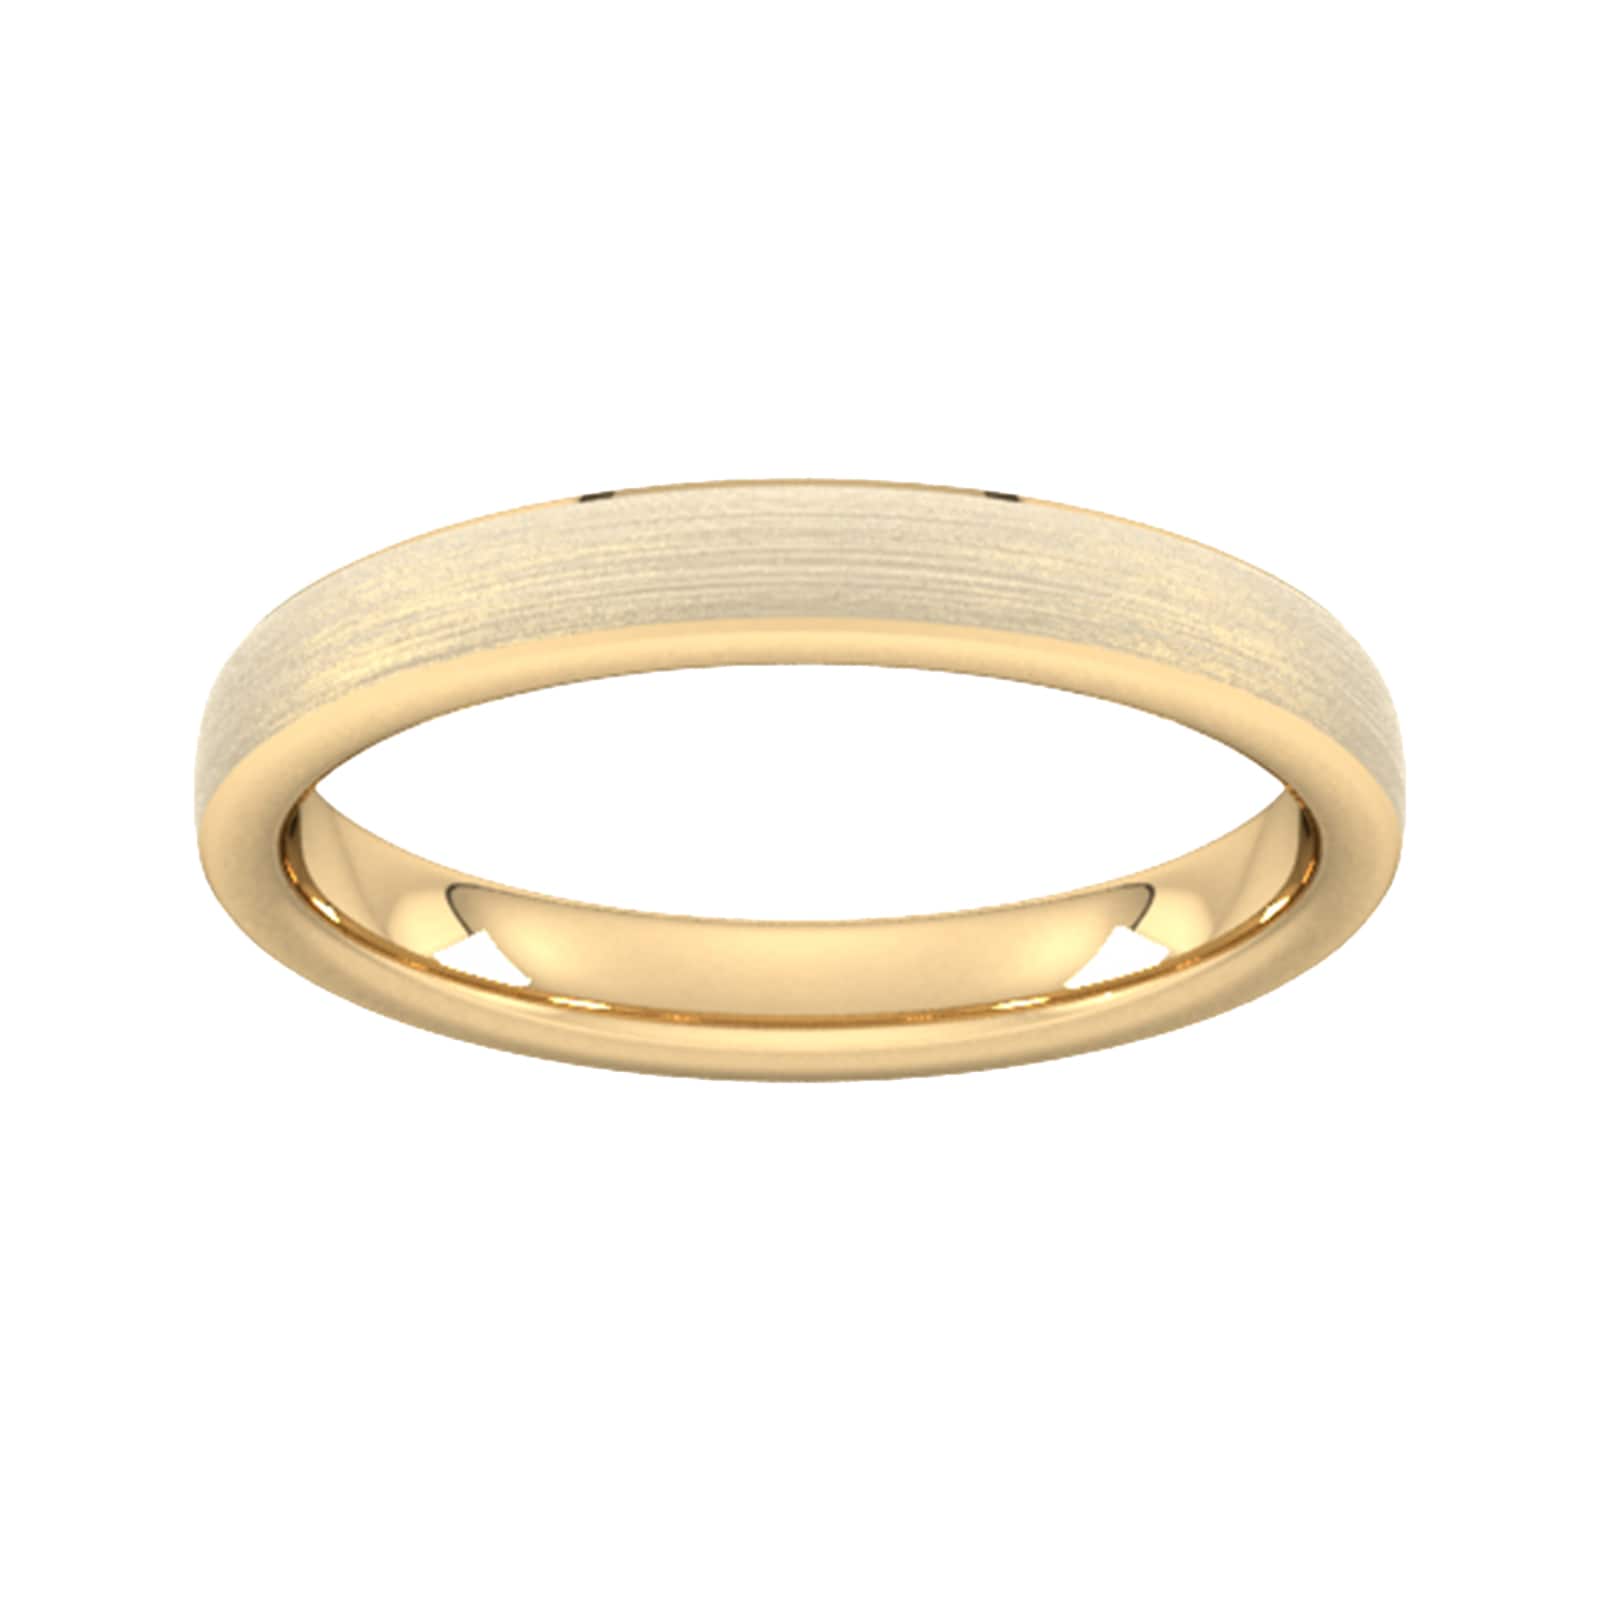 3mm Slight Court Standard Polished Chamfered Edges With Matt Centre Wedding Ring In 9 Carat Yellow Gold - Ring Size K